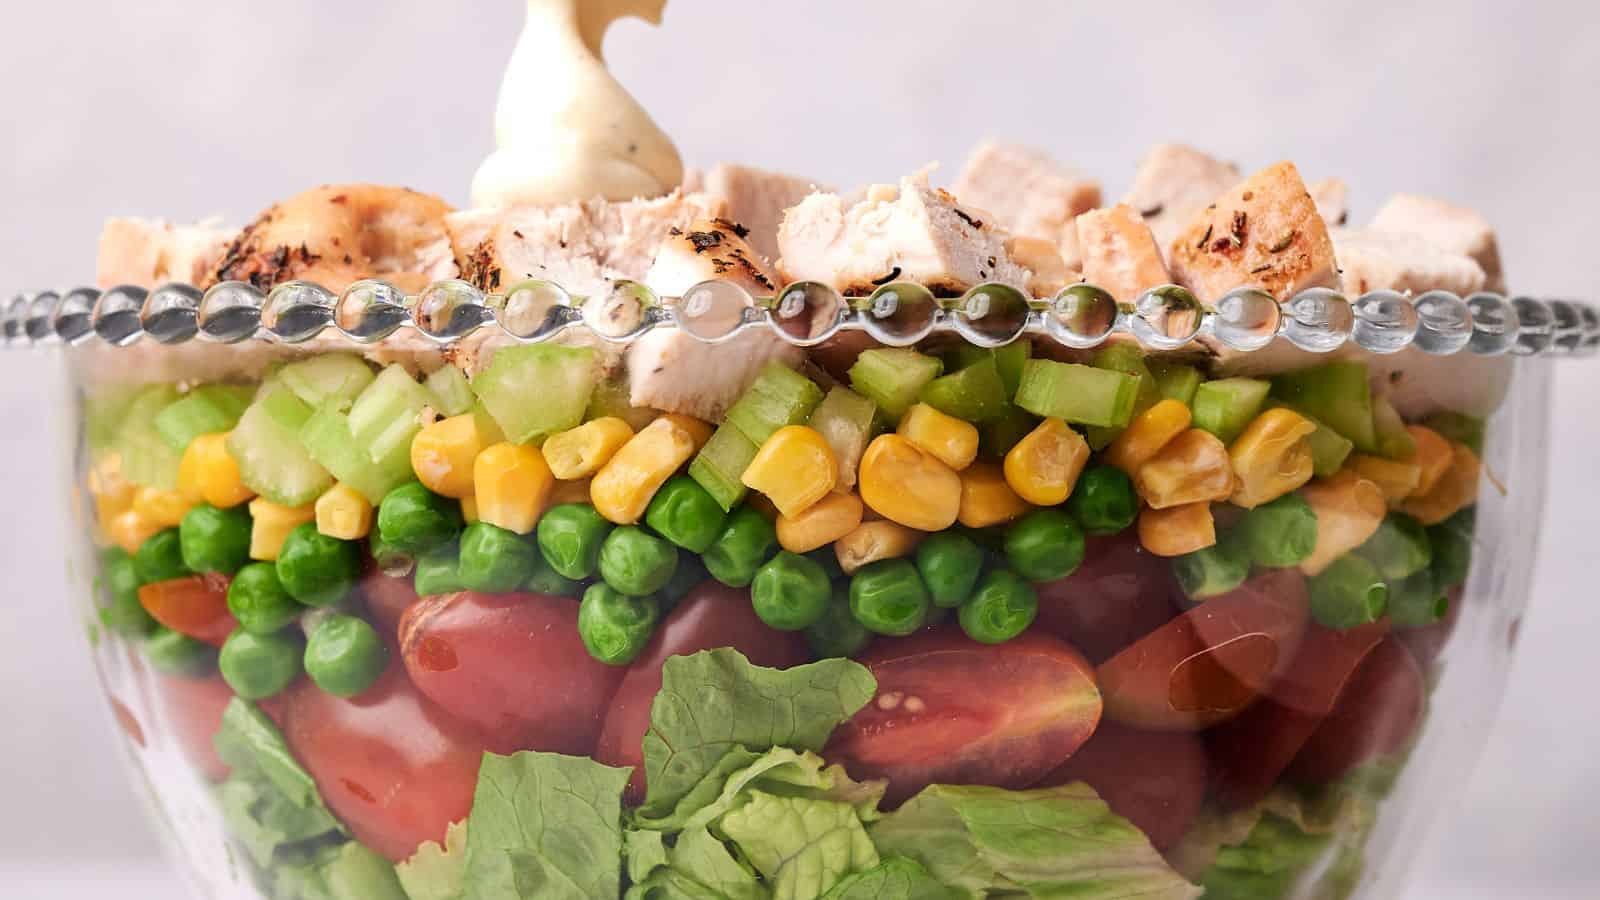 A clear glass bowl layered with lettuce, cherry tomatoes, green peas, corn, diced celery, and topped with chunks of grilled chicken, garnished with a dollop of mayonnaise.